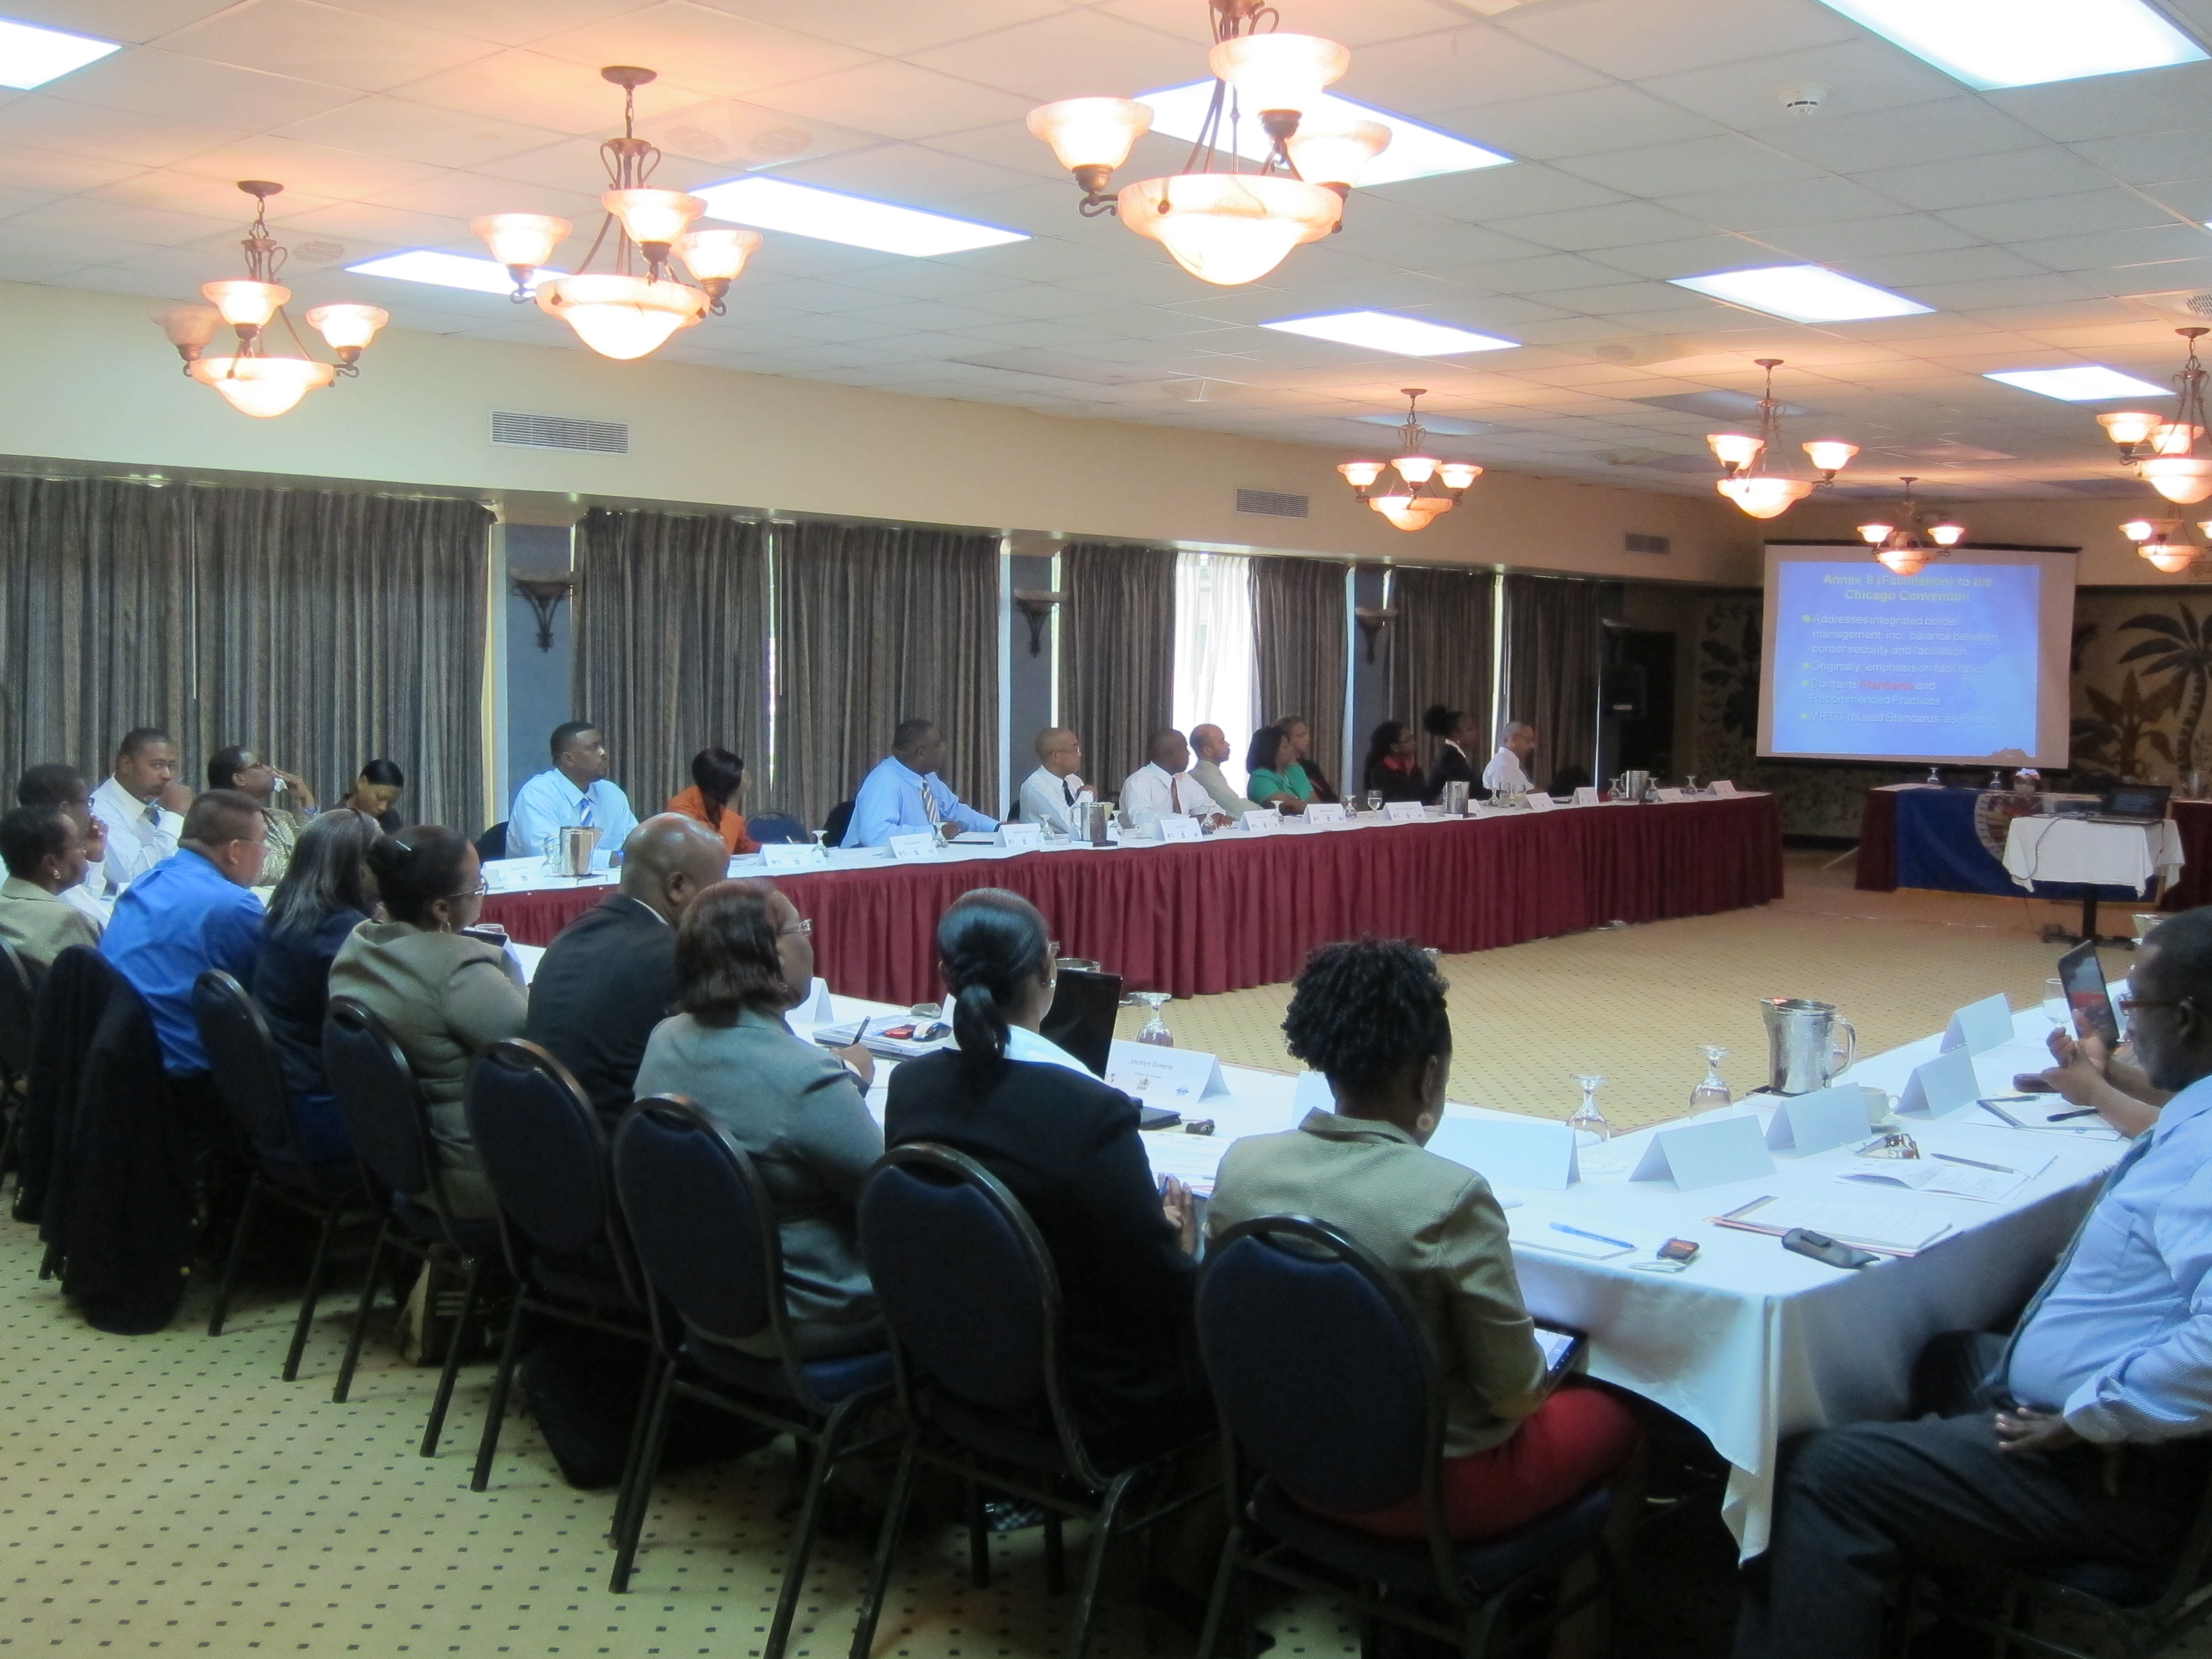 Workshop on Travel Document Security and Identity Management(September 5, 2012)